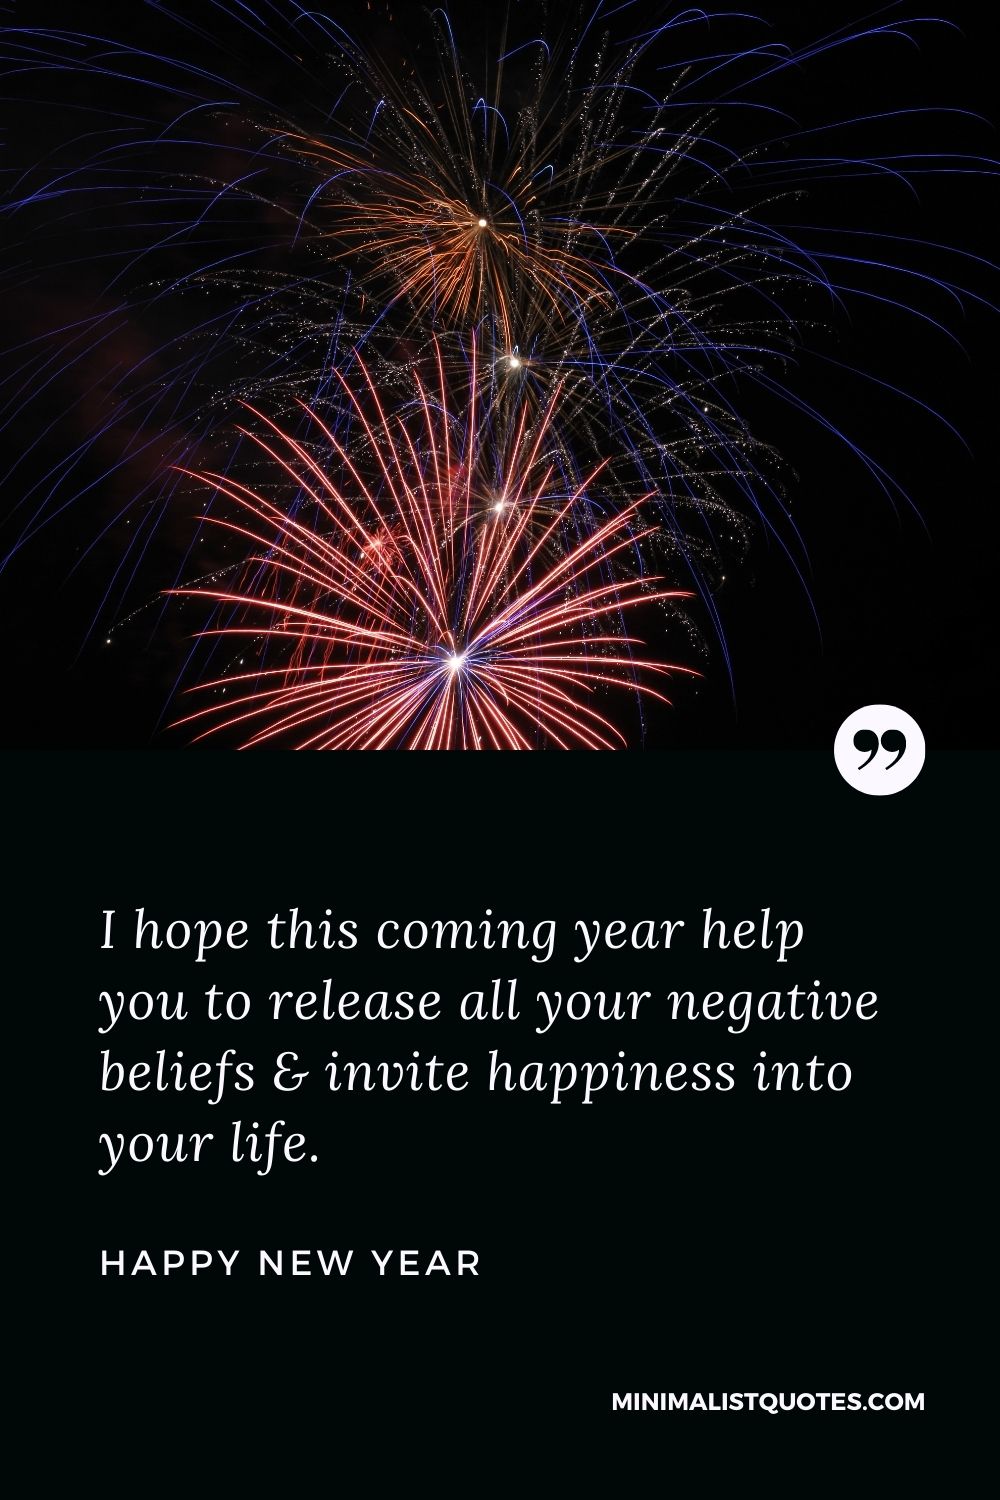 New Year Wish - I hope this coming year help you to release all your negative beliefs & invite happiness into your life.